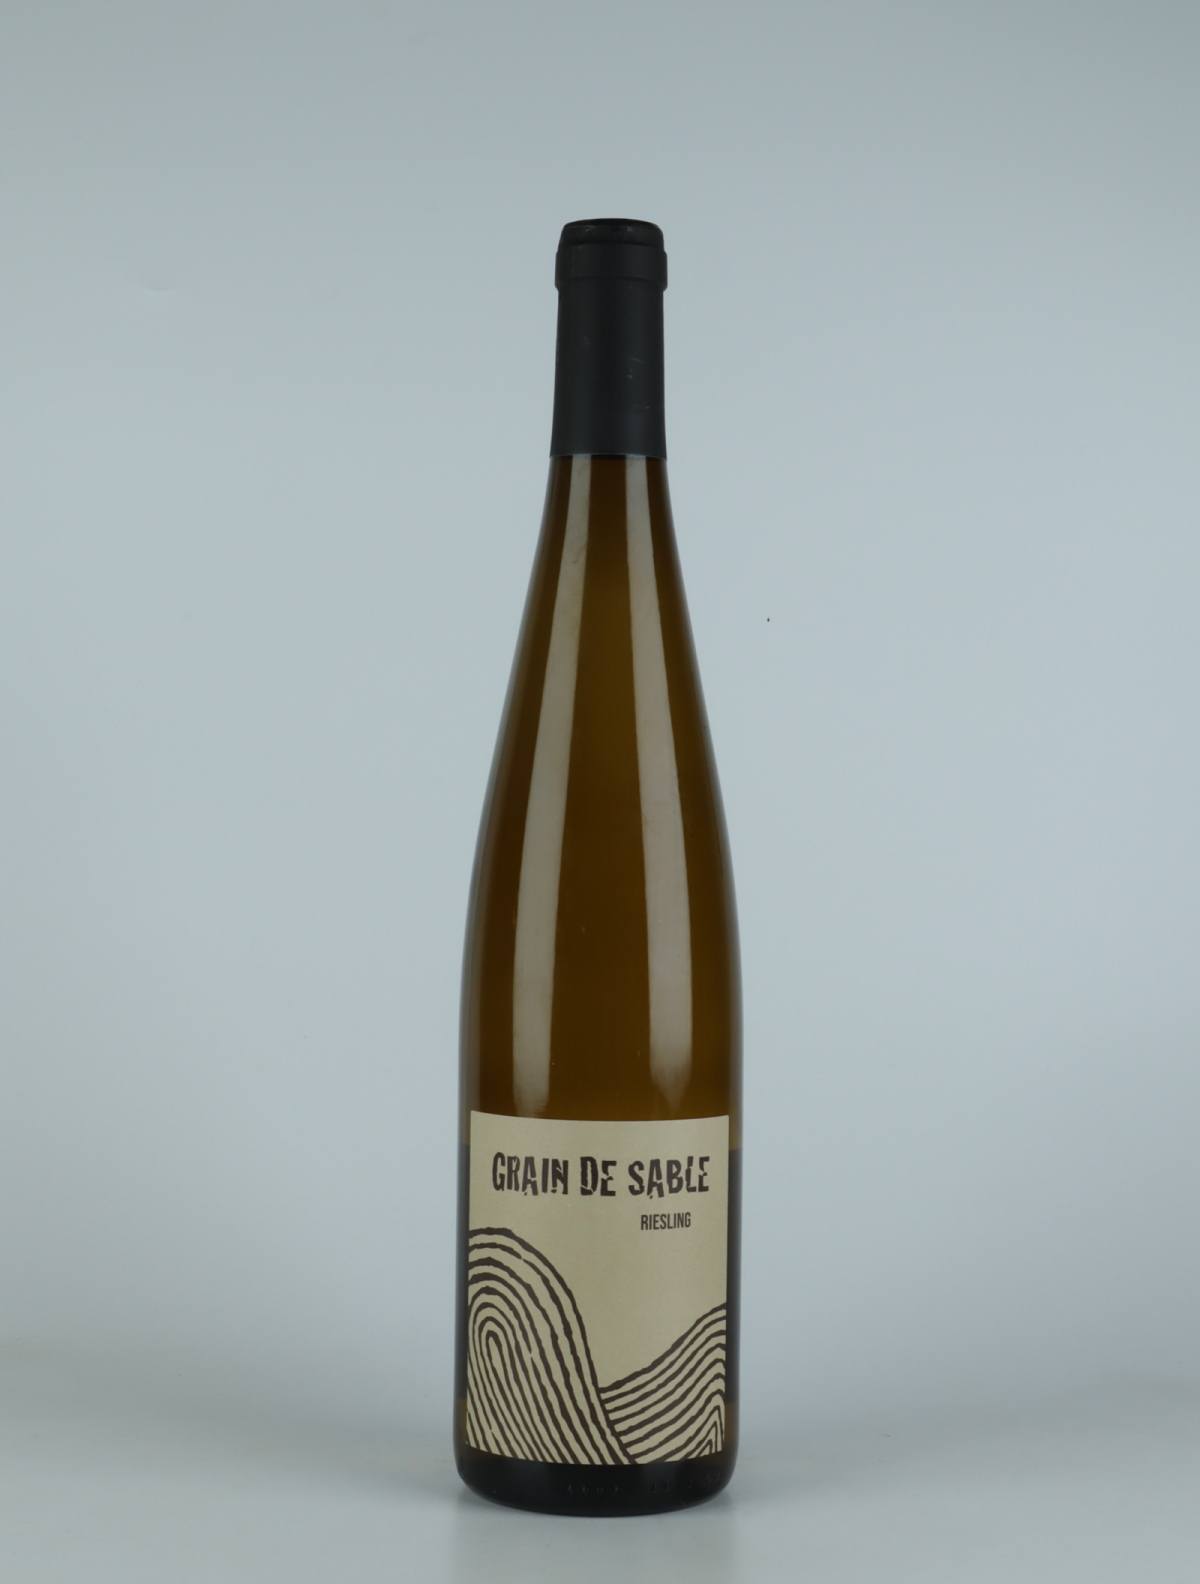 A bottle 2020 Riesling Grain de Sable White wine from Ruhlmann Dirringer, Alsace in France